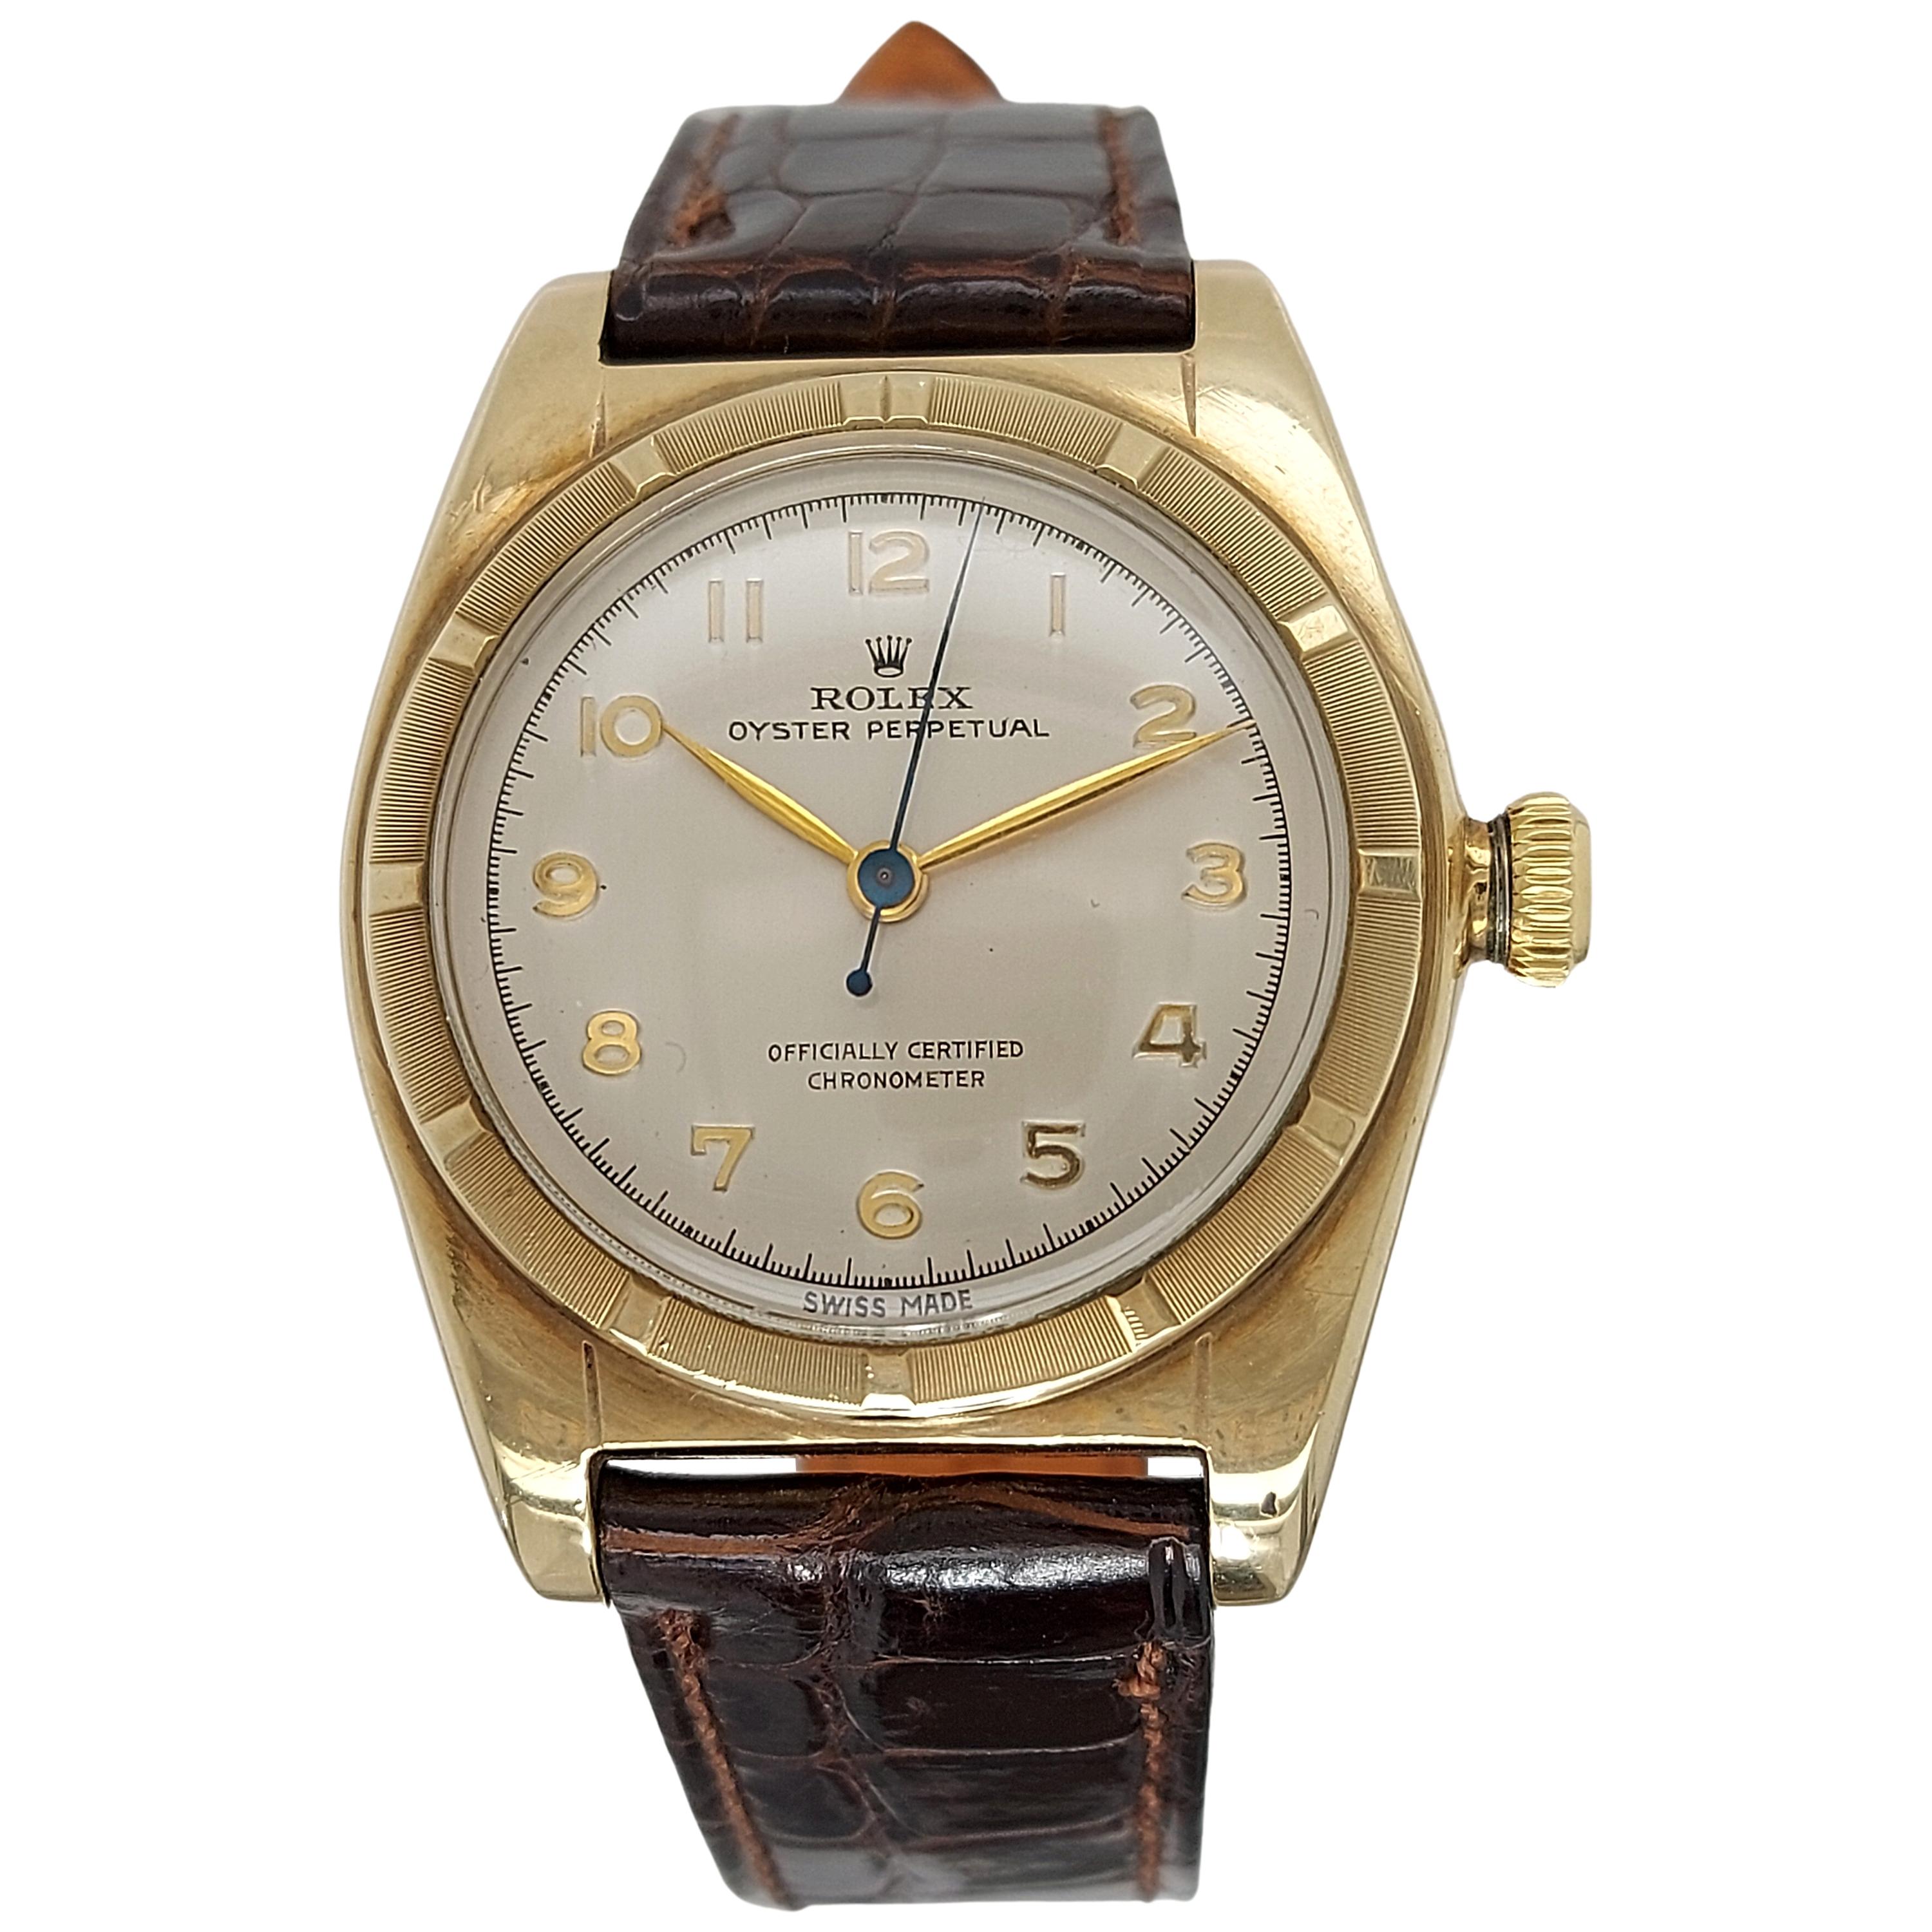 Rolex Oyster Perpetual Bubble Back Reference 5011, Automatic